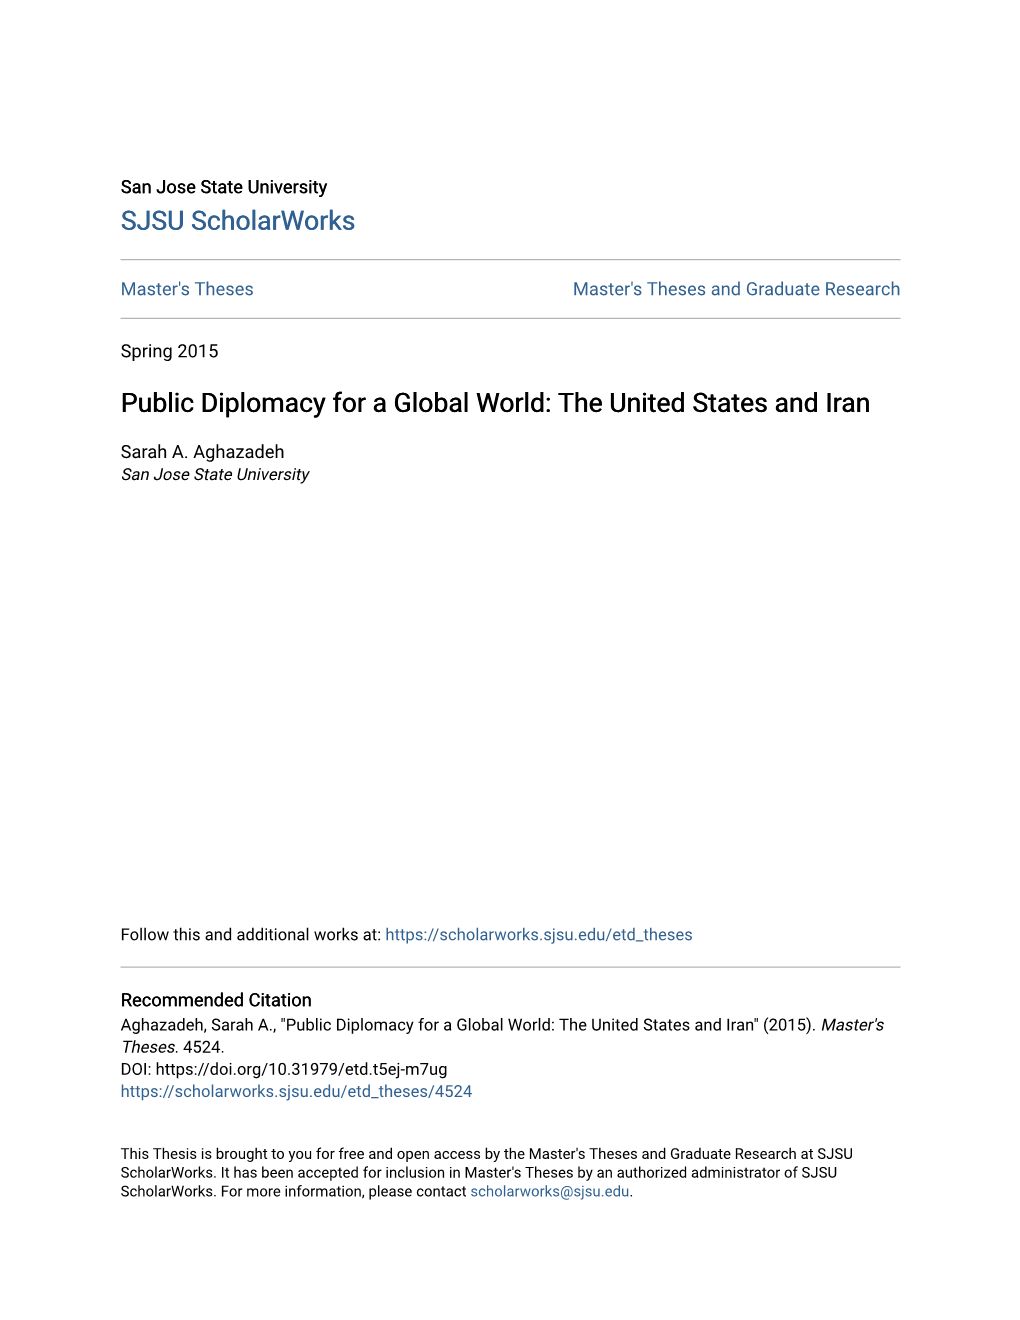 Public Diplomacy for a Global World: the United States and Iran